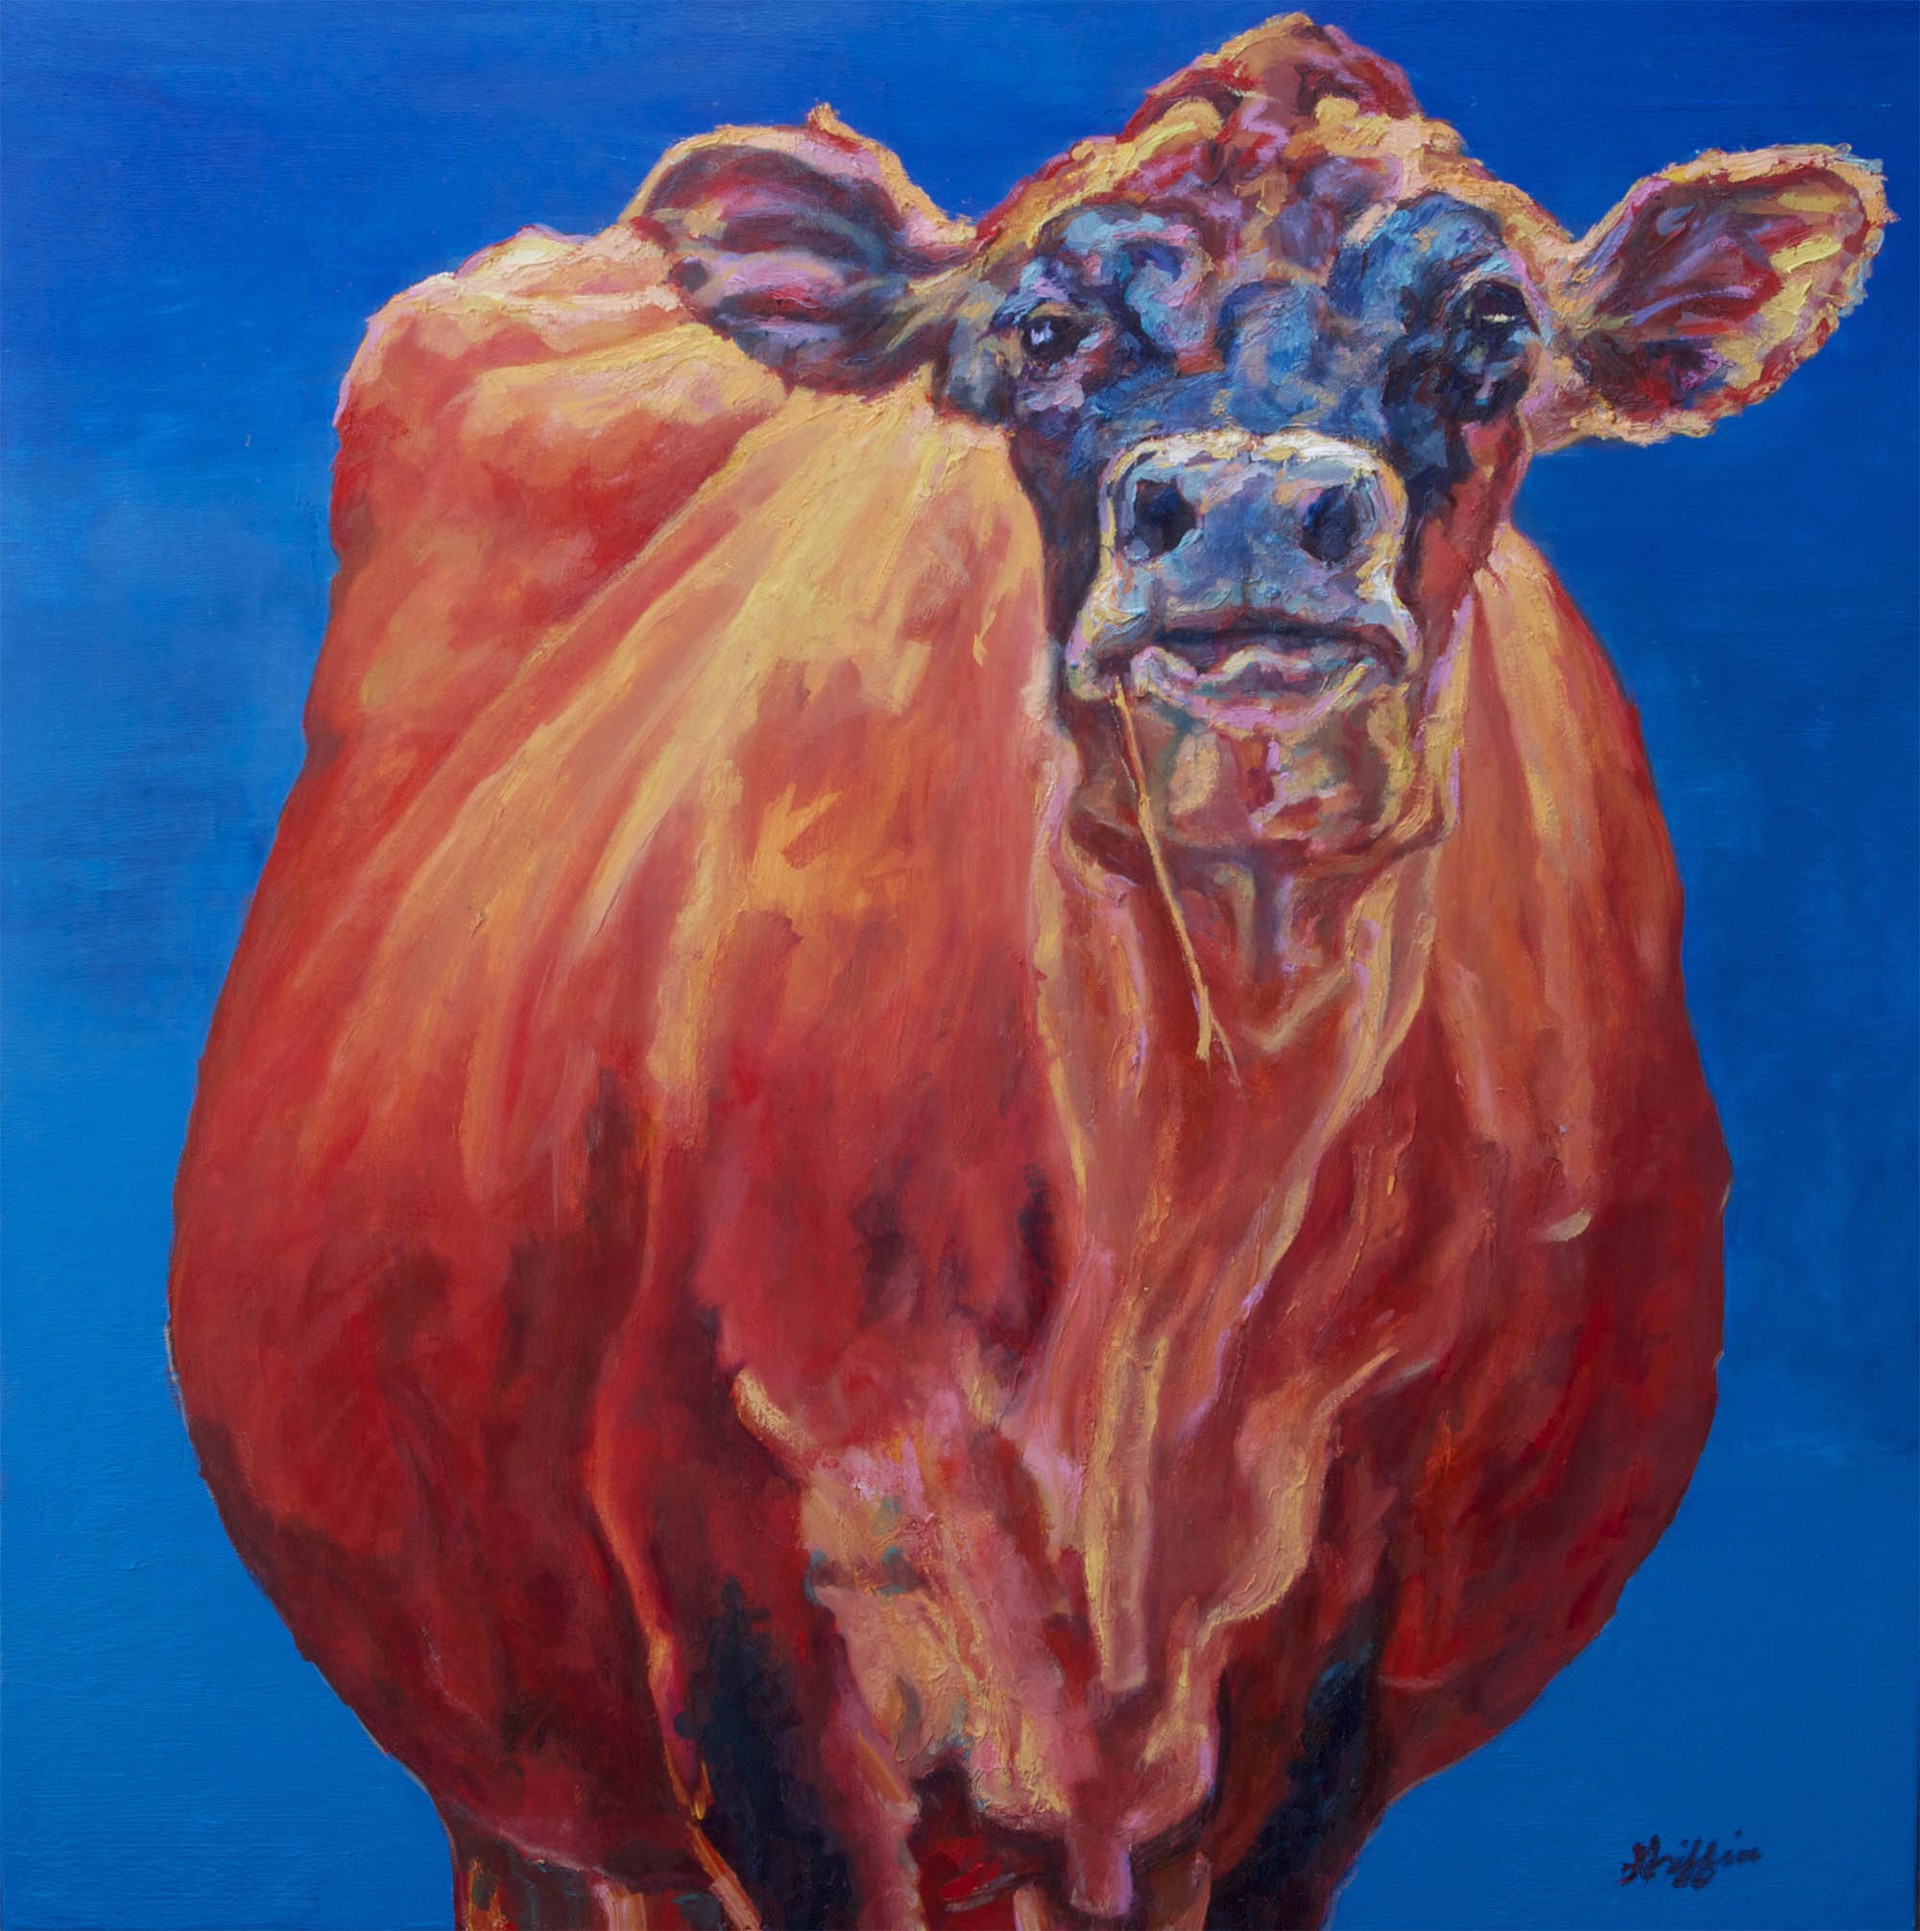 Original Oil Painting Featuring An Orange Cow Over Blue Background